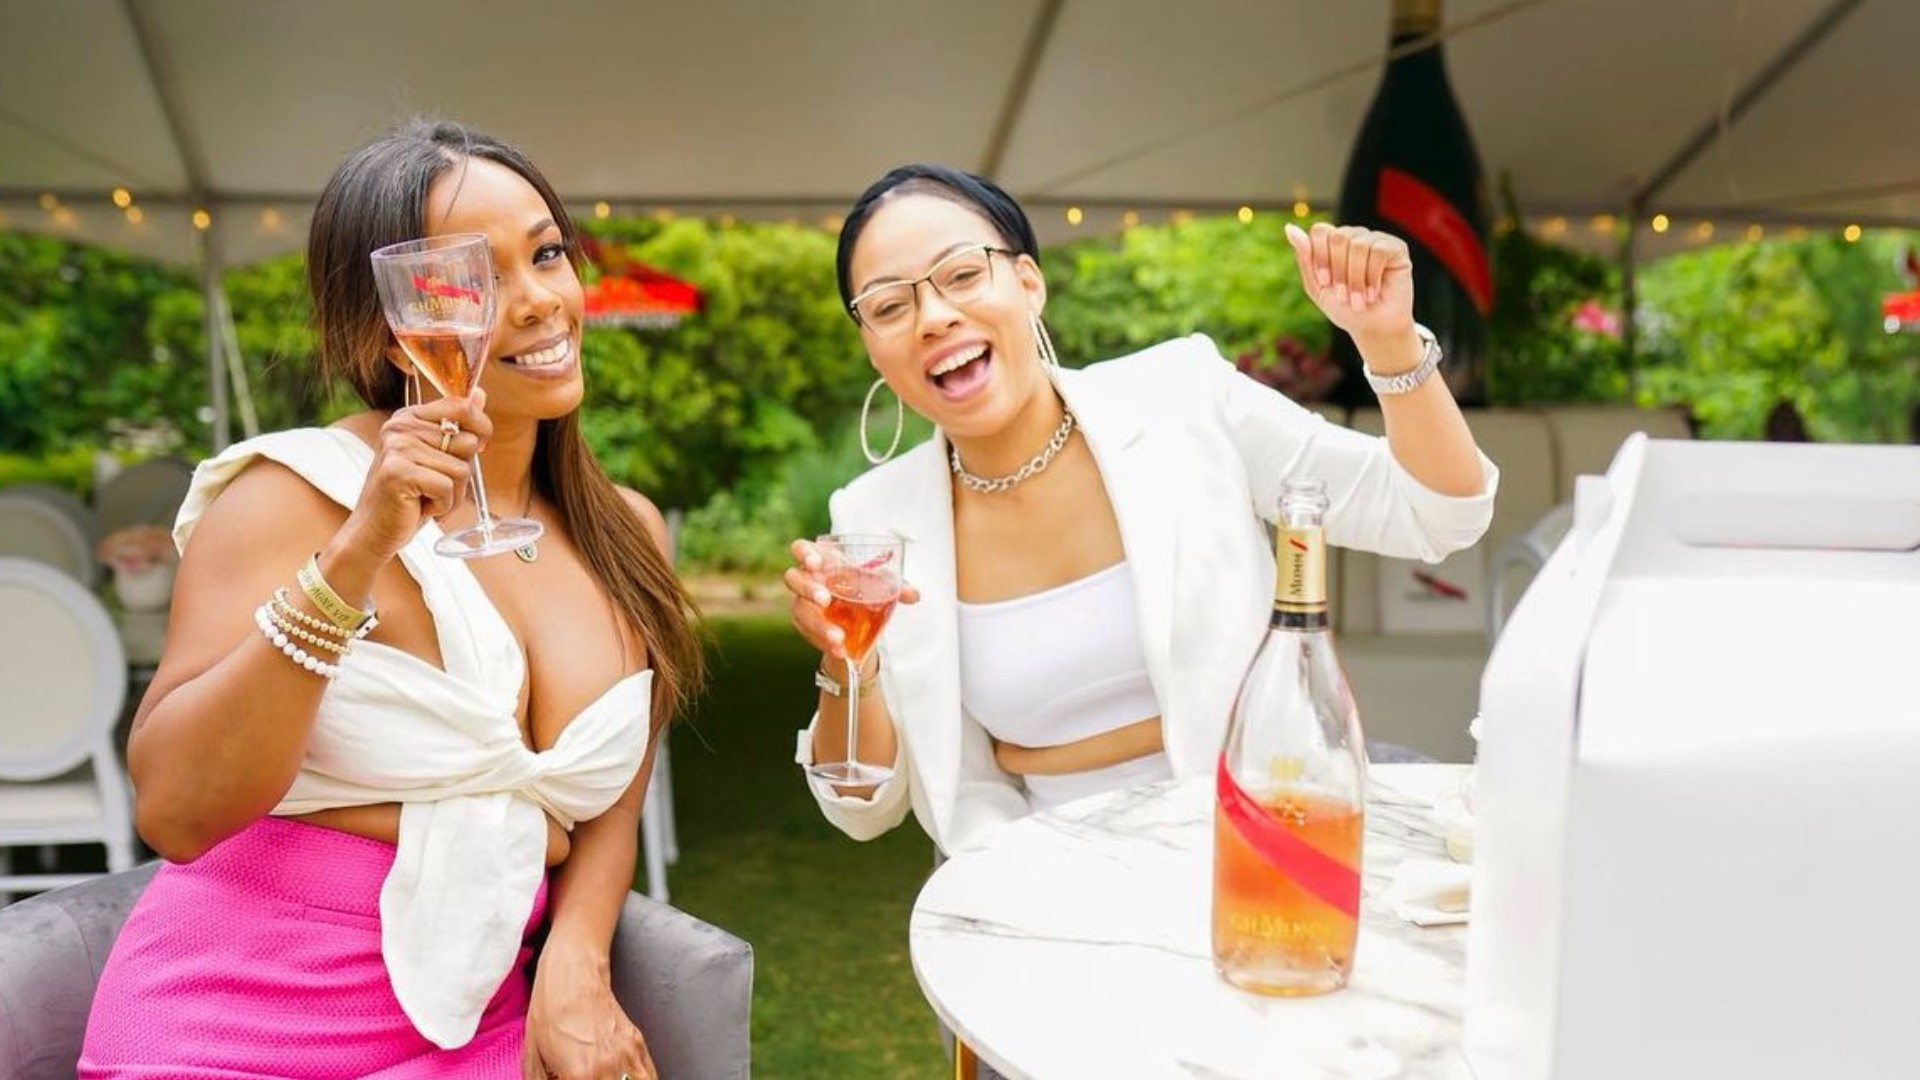 Grab your finest pink attire, your friends, and your wine glasses! The popular wine & music festival, Celebrez en Rose, returns to the DMV area on May 28th!